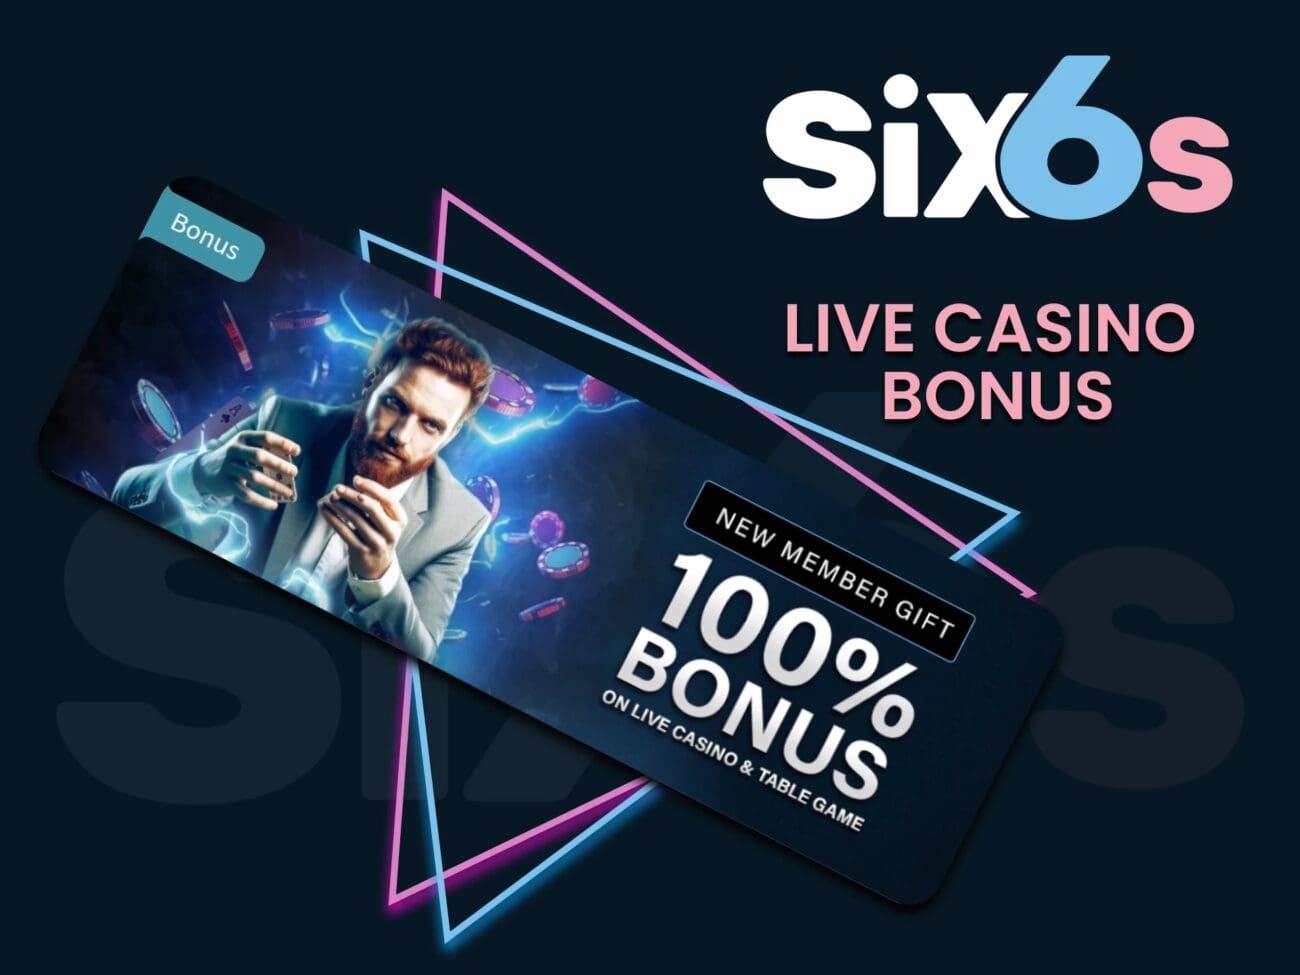 Our review will show you how safe and legal it is to play at Six6s Casino. Bettors from India should find out more about the betting operator, there is a table with details about the casino below. Find out how to start playing the best slots and still be safe. The instructions on how to create an account are already written for you.